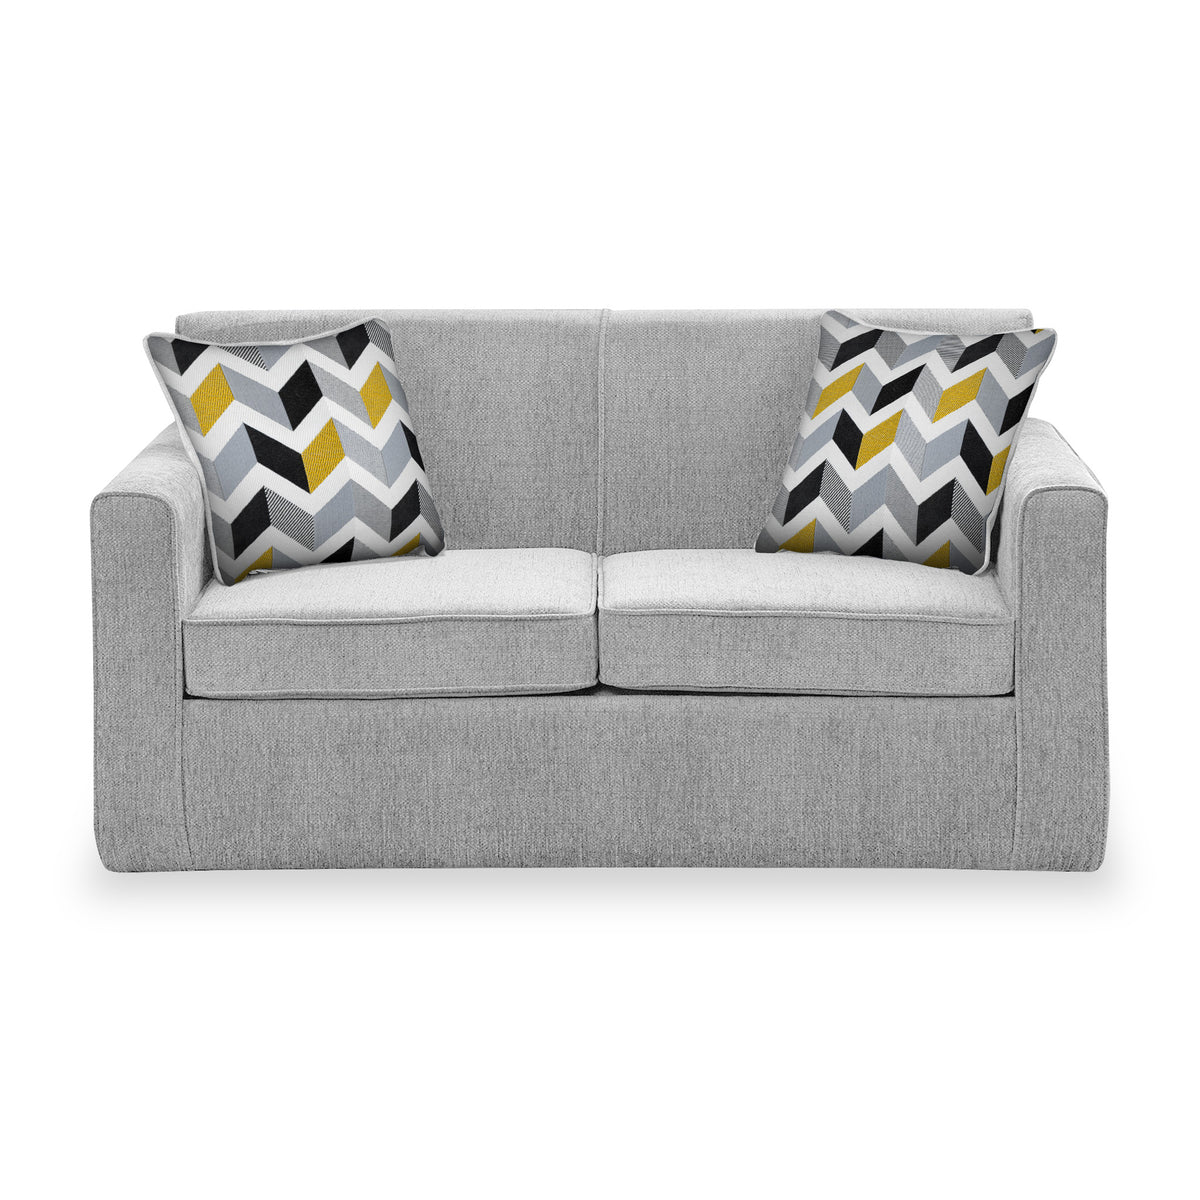 Bawtry Silver Faux Linen 2 Seater Sofabed with Mustard Scatter Cushions from Roseland Furniture